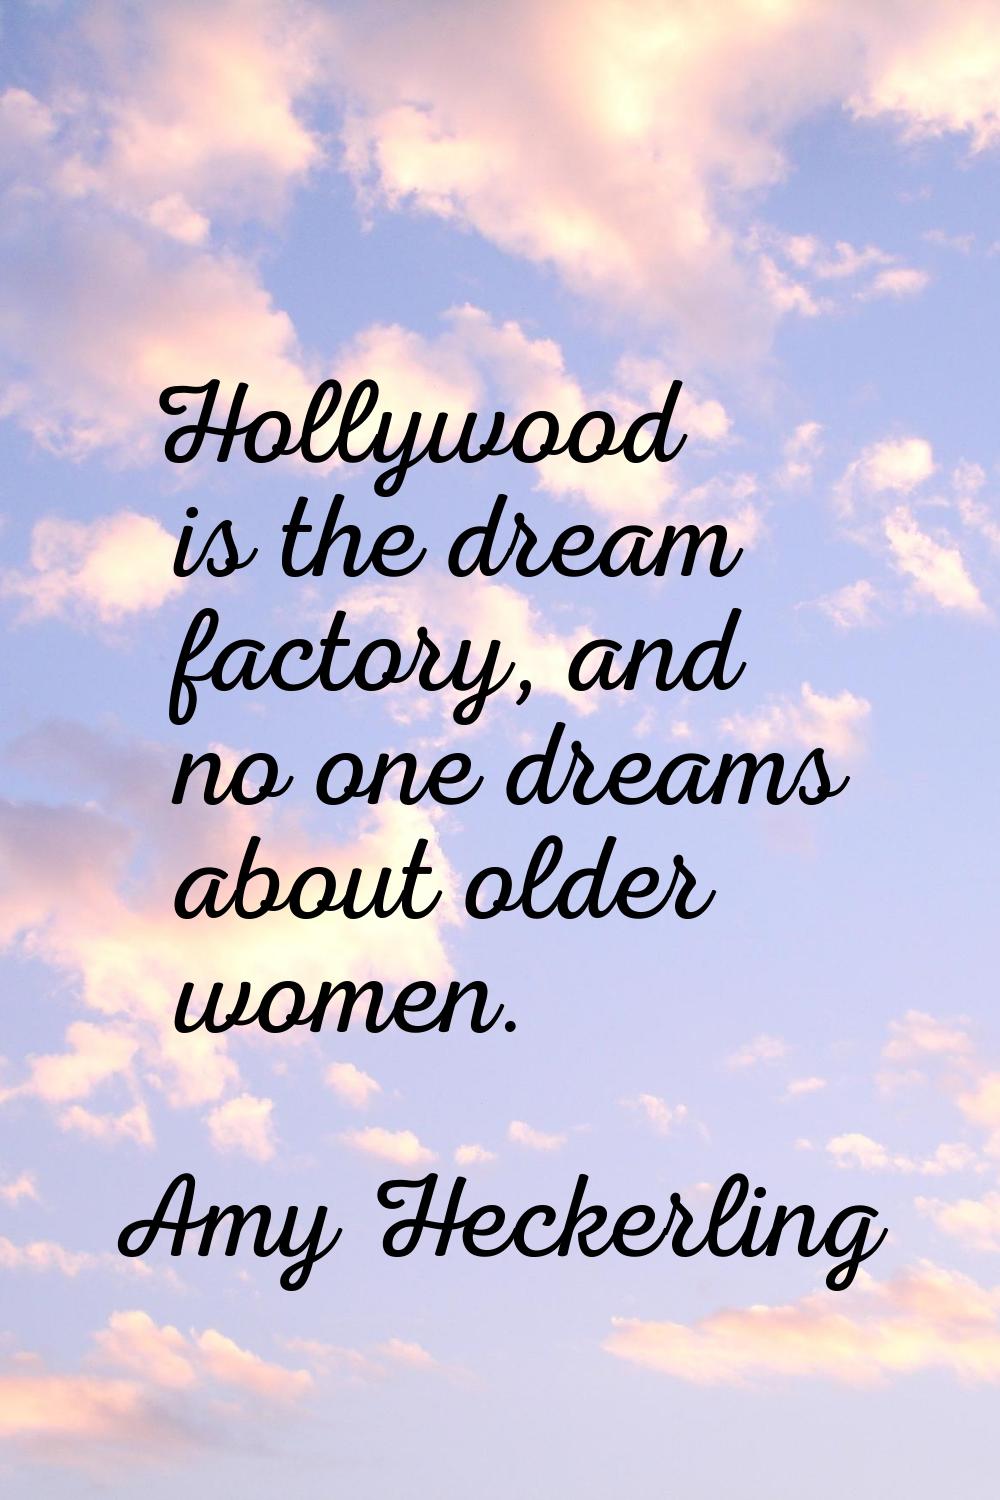 Hollywood is the dream factory, and no one dreams about older women.